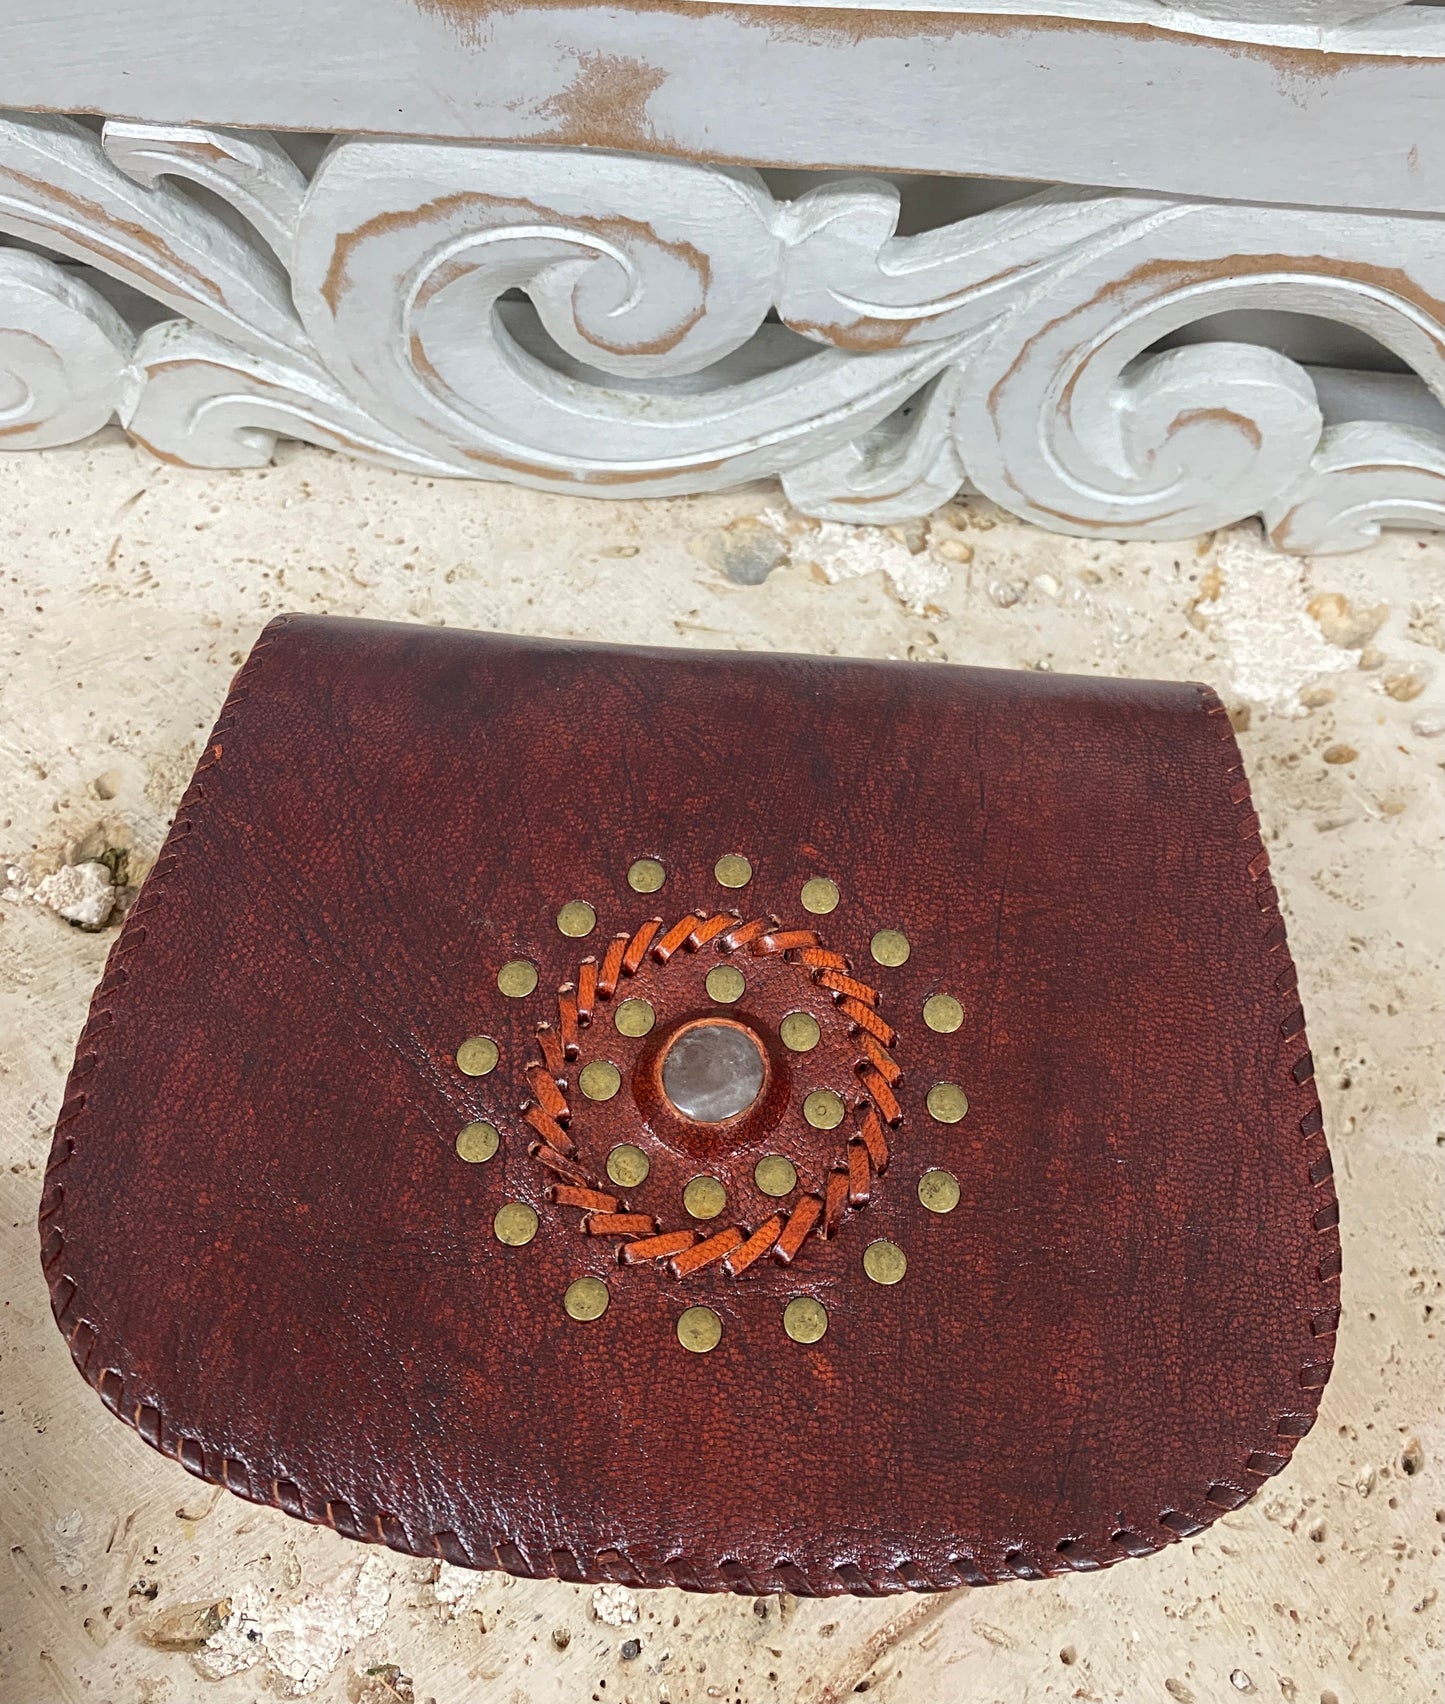 Hand Made Camel Leather Round bottom purse with Gemstones 3 Pockets! 7" x 5”